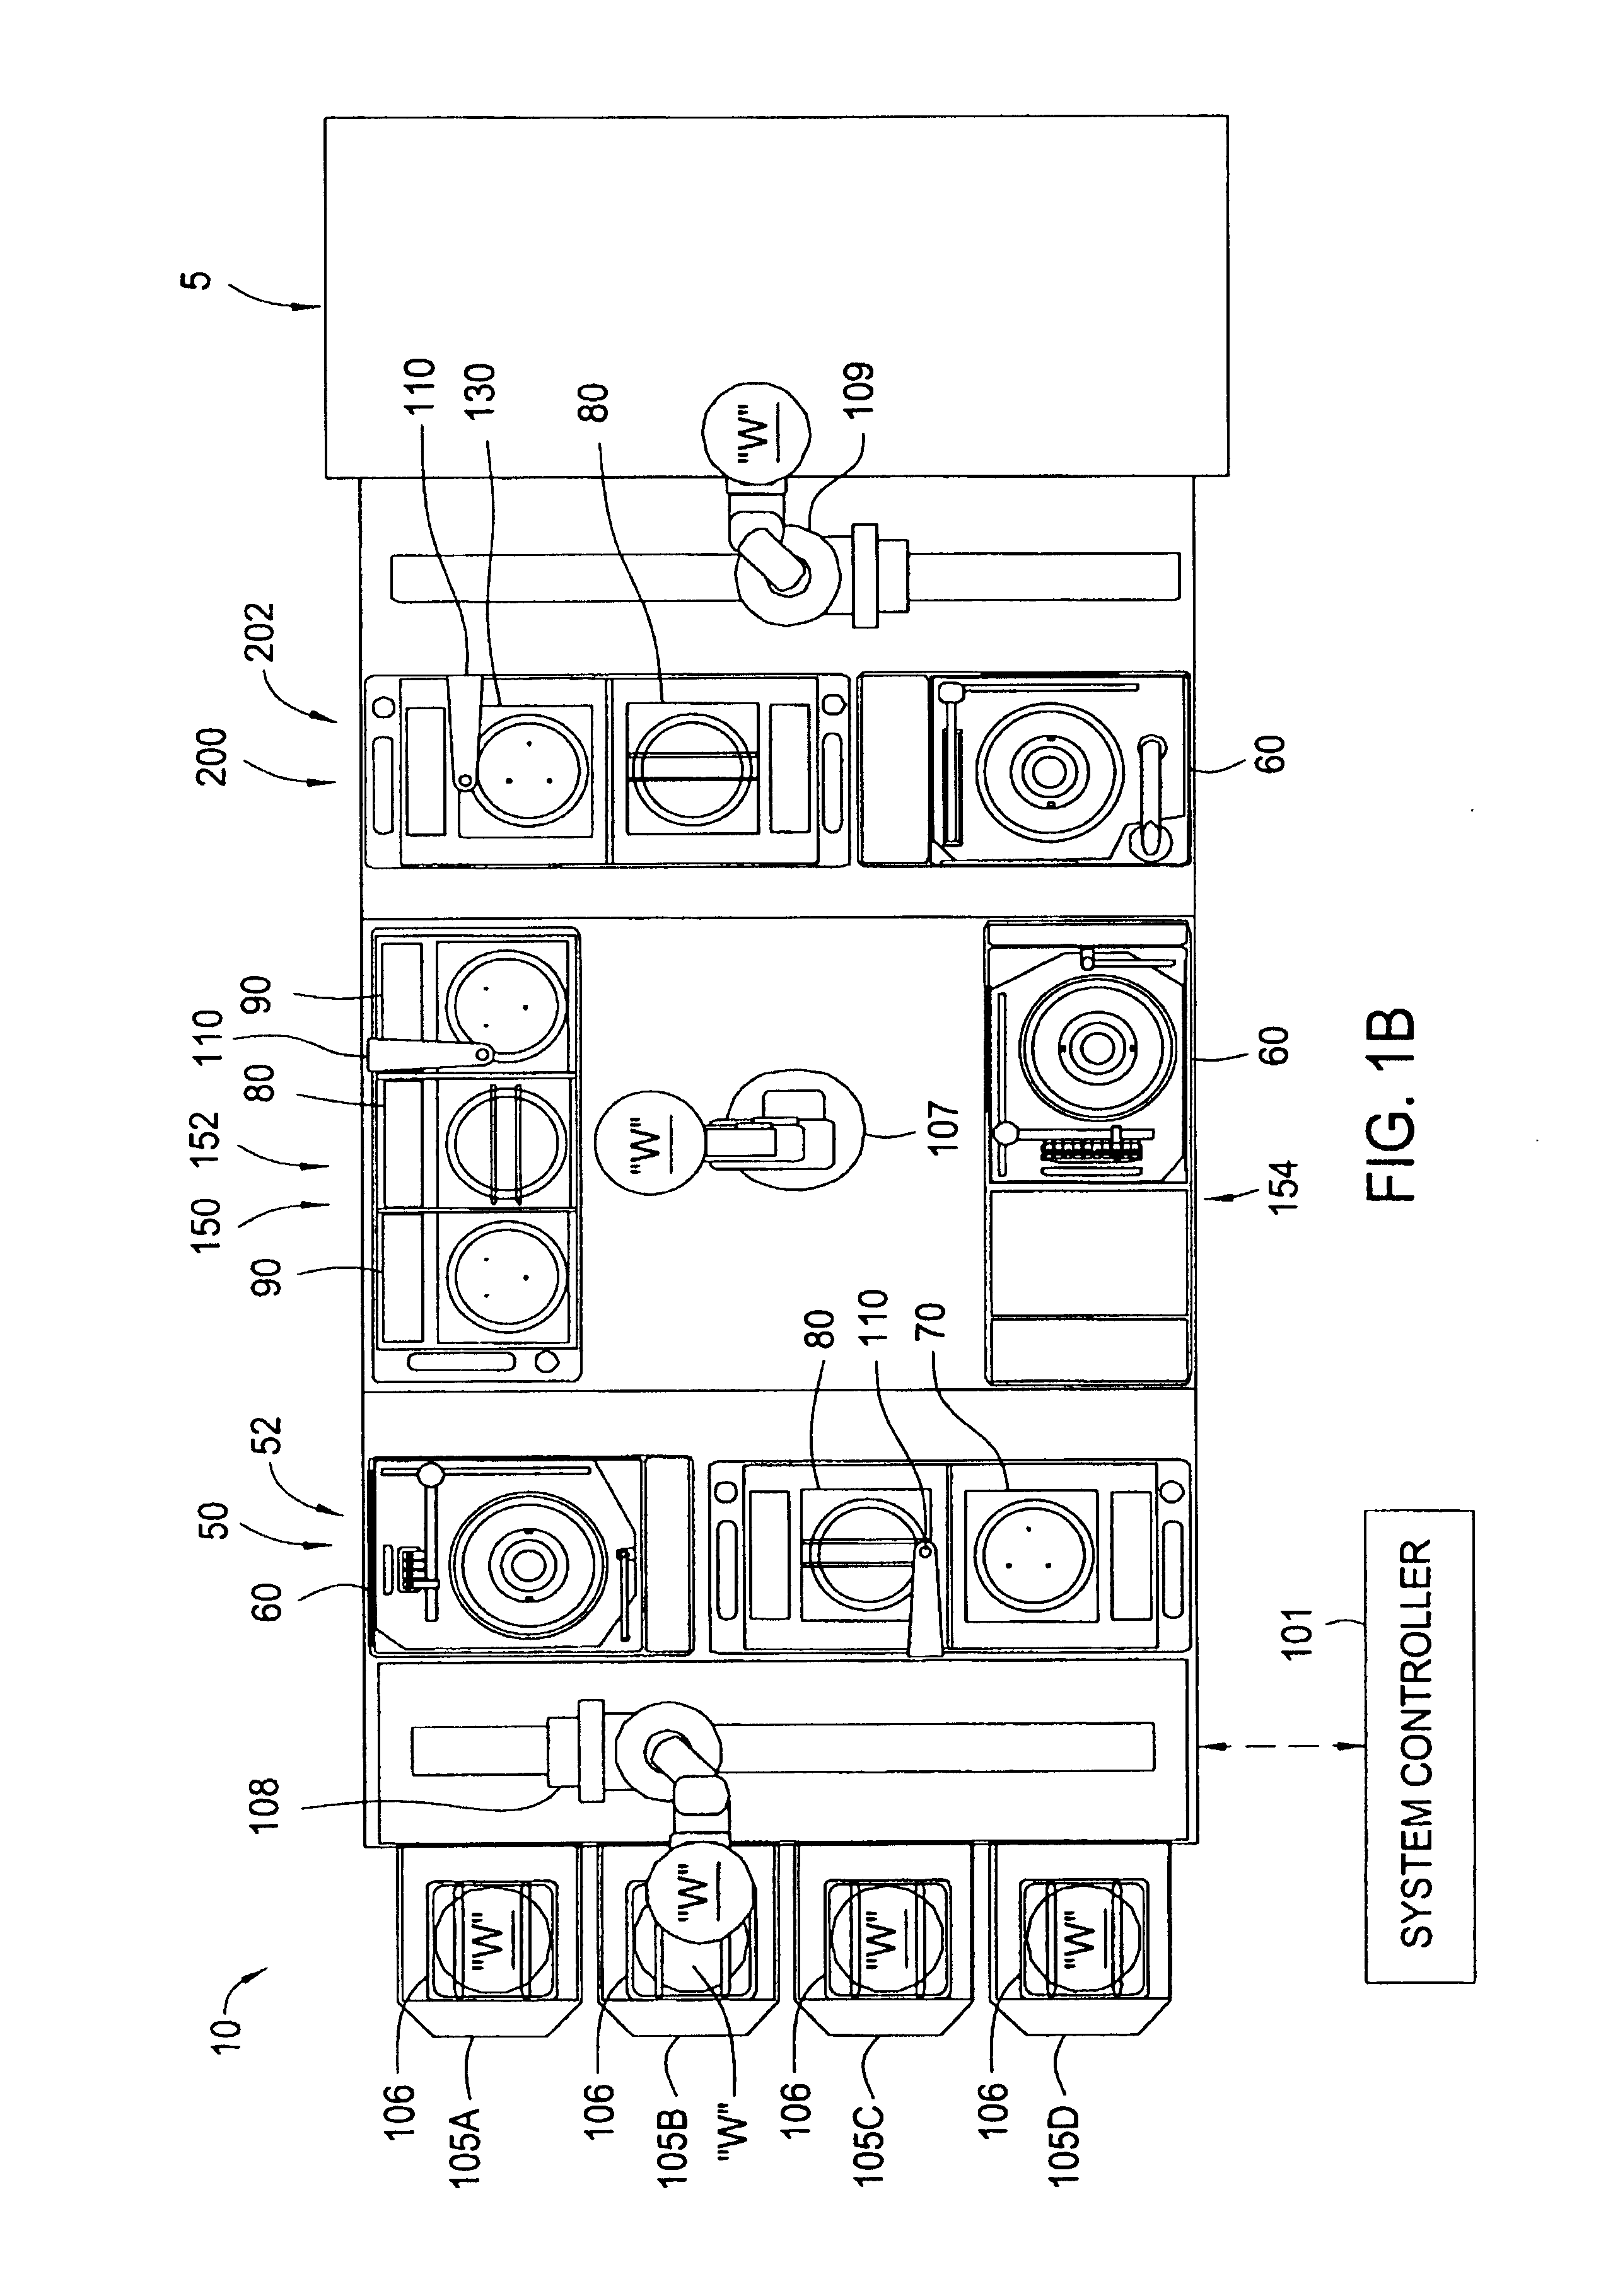 Cluster tool architecture for processing a substrate